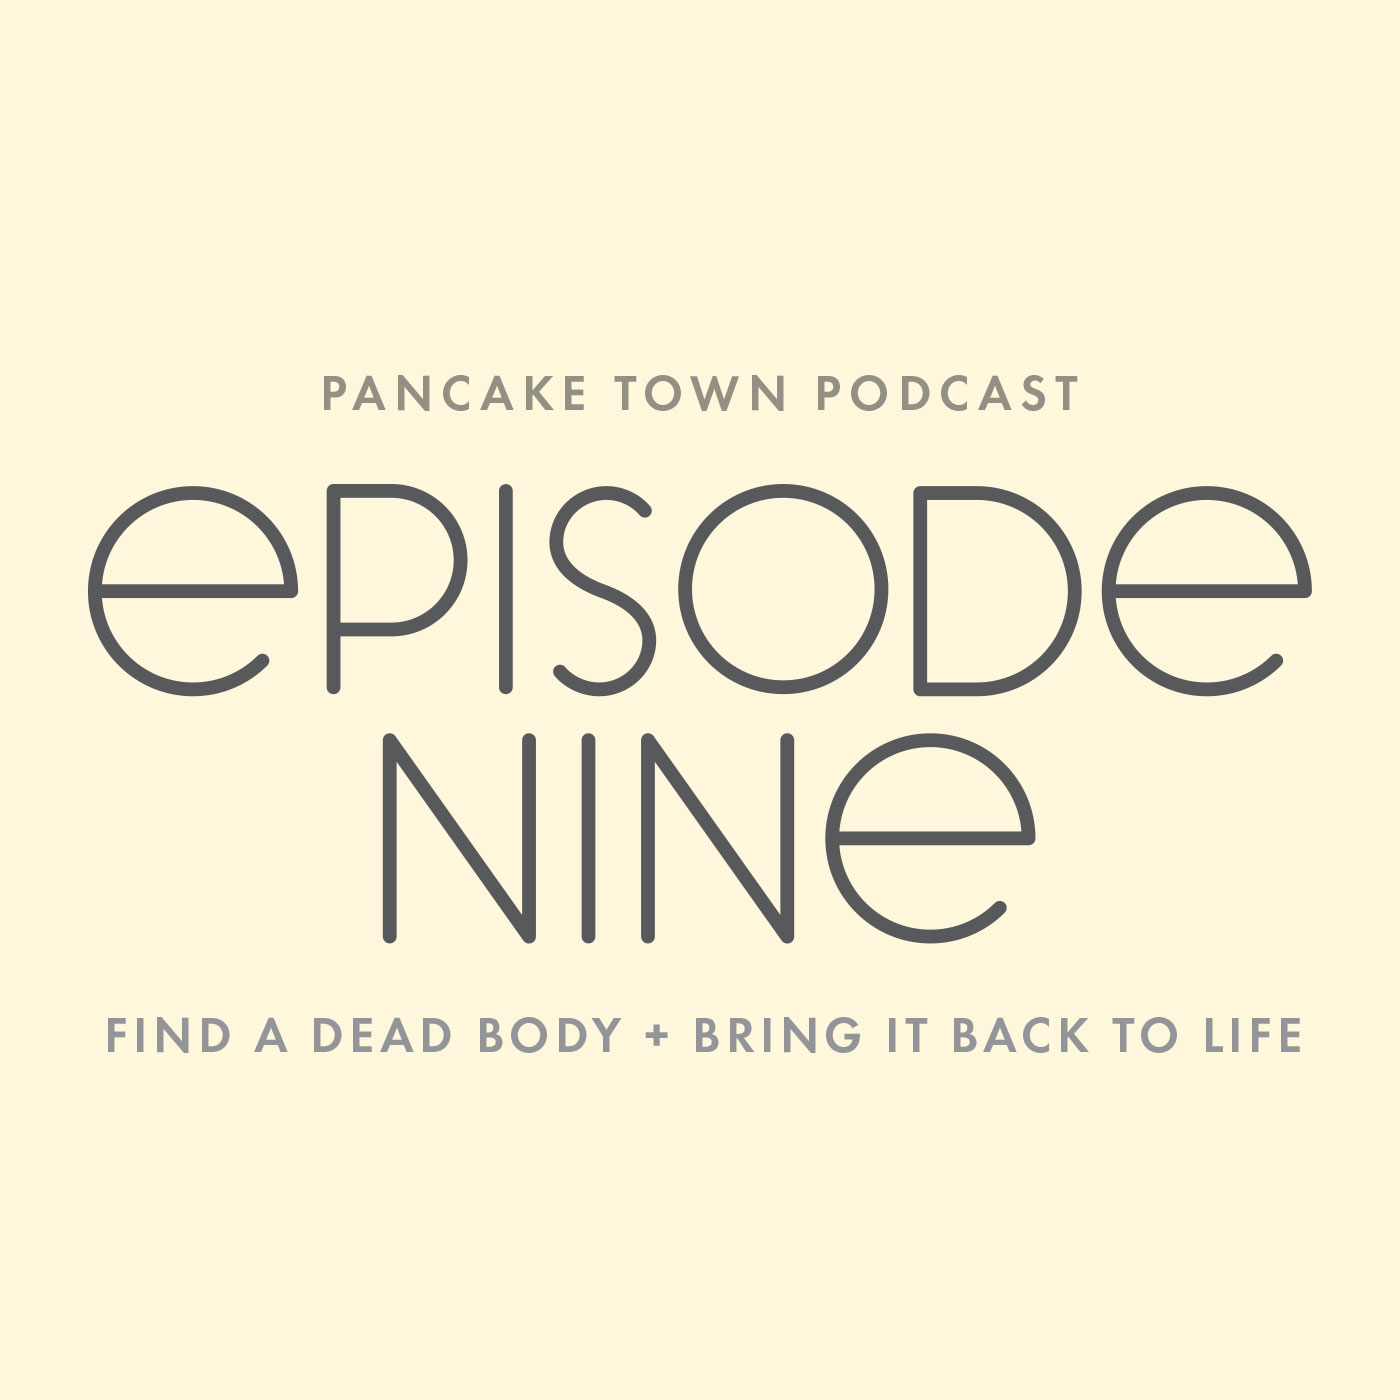 Episode 9 - Find a Dead Body and Bring It Back to Life